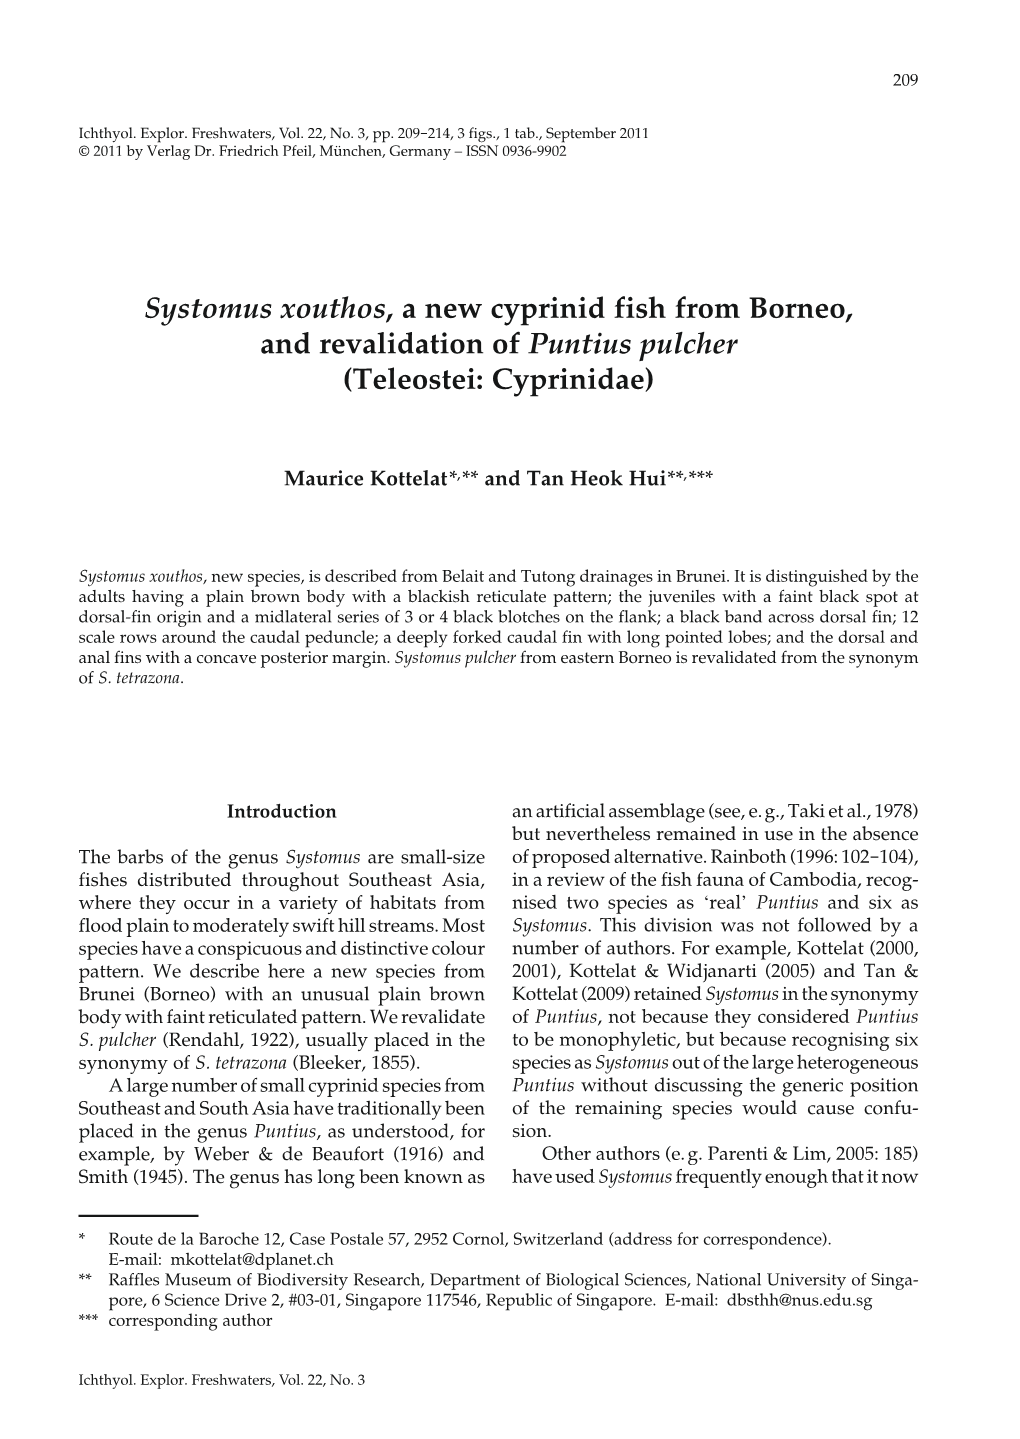 Systomus Xouthos, a New Cyprinid Fish from Borneo, and Revalidation of Puntius Pulcher (Teleostei: Cyprinidae)